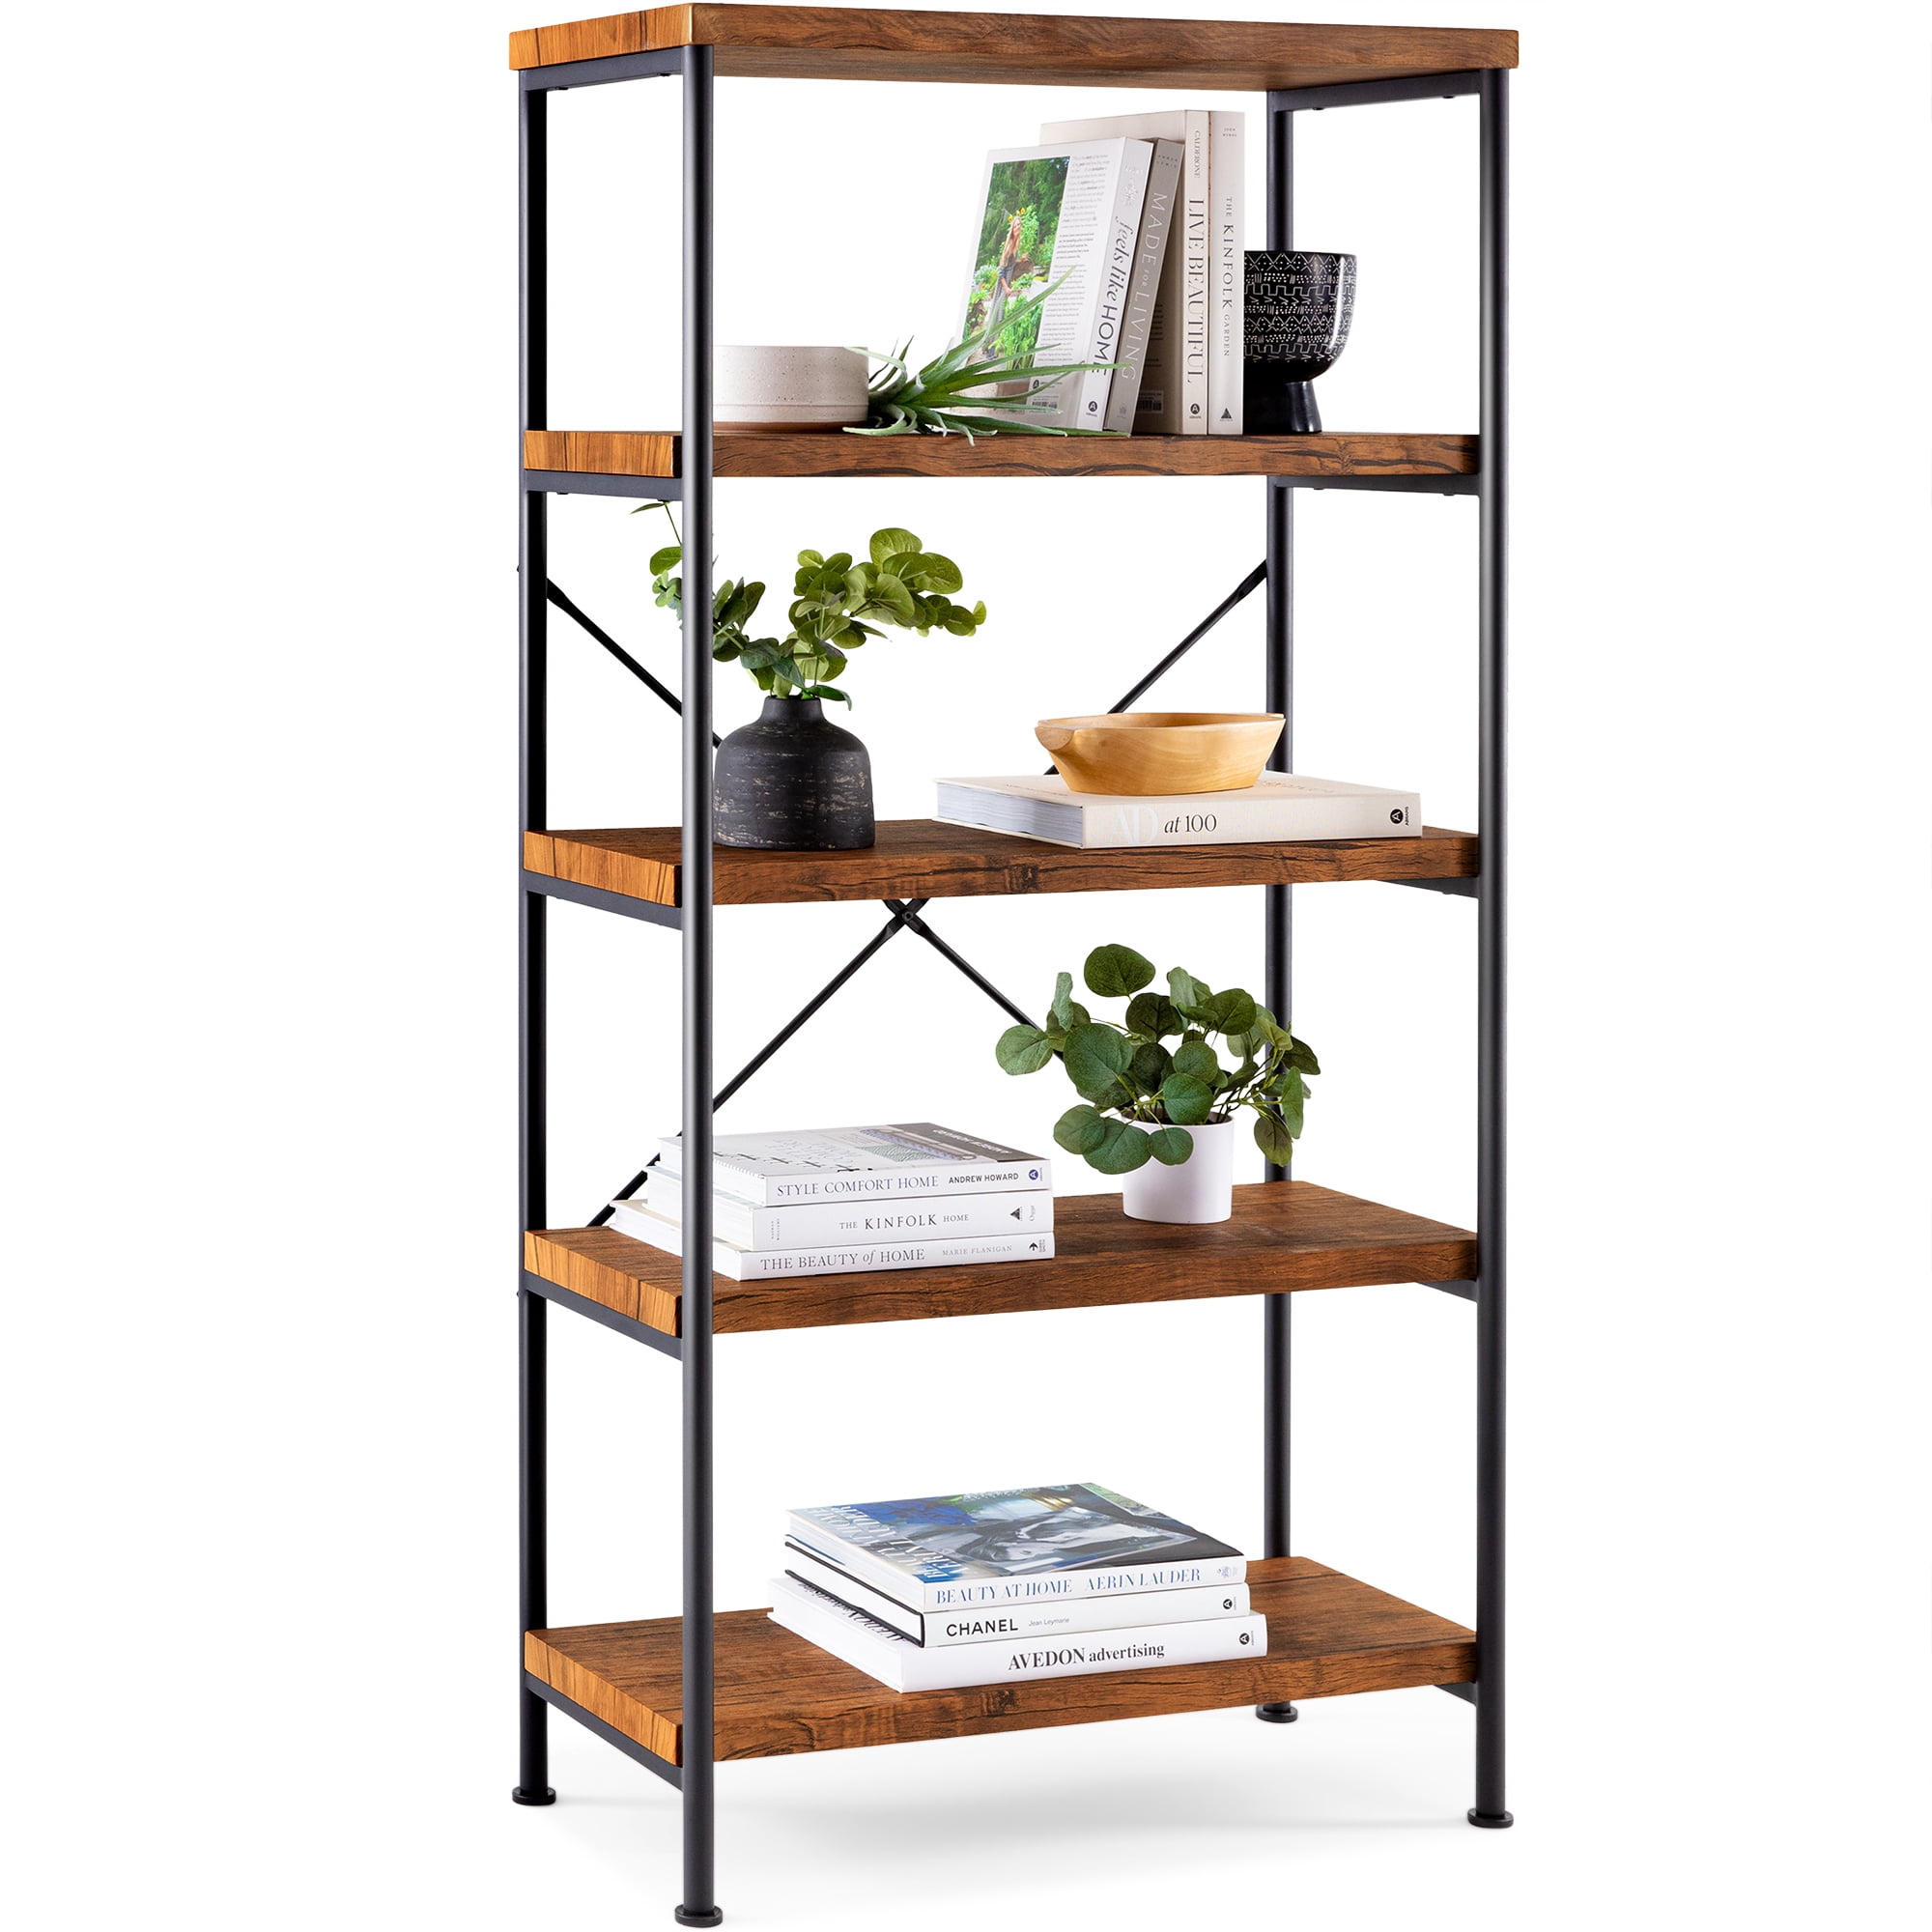 New 3-Shelf Product Display-Commercial Grade Metal Frame Will Sell In Bulk. 